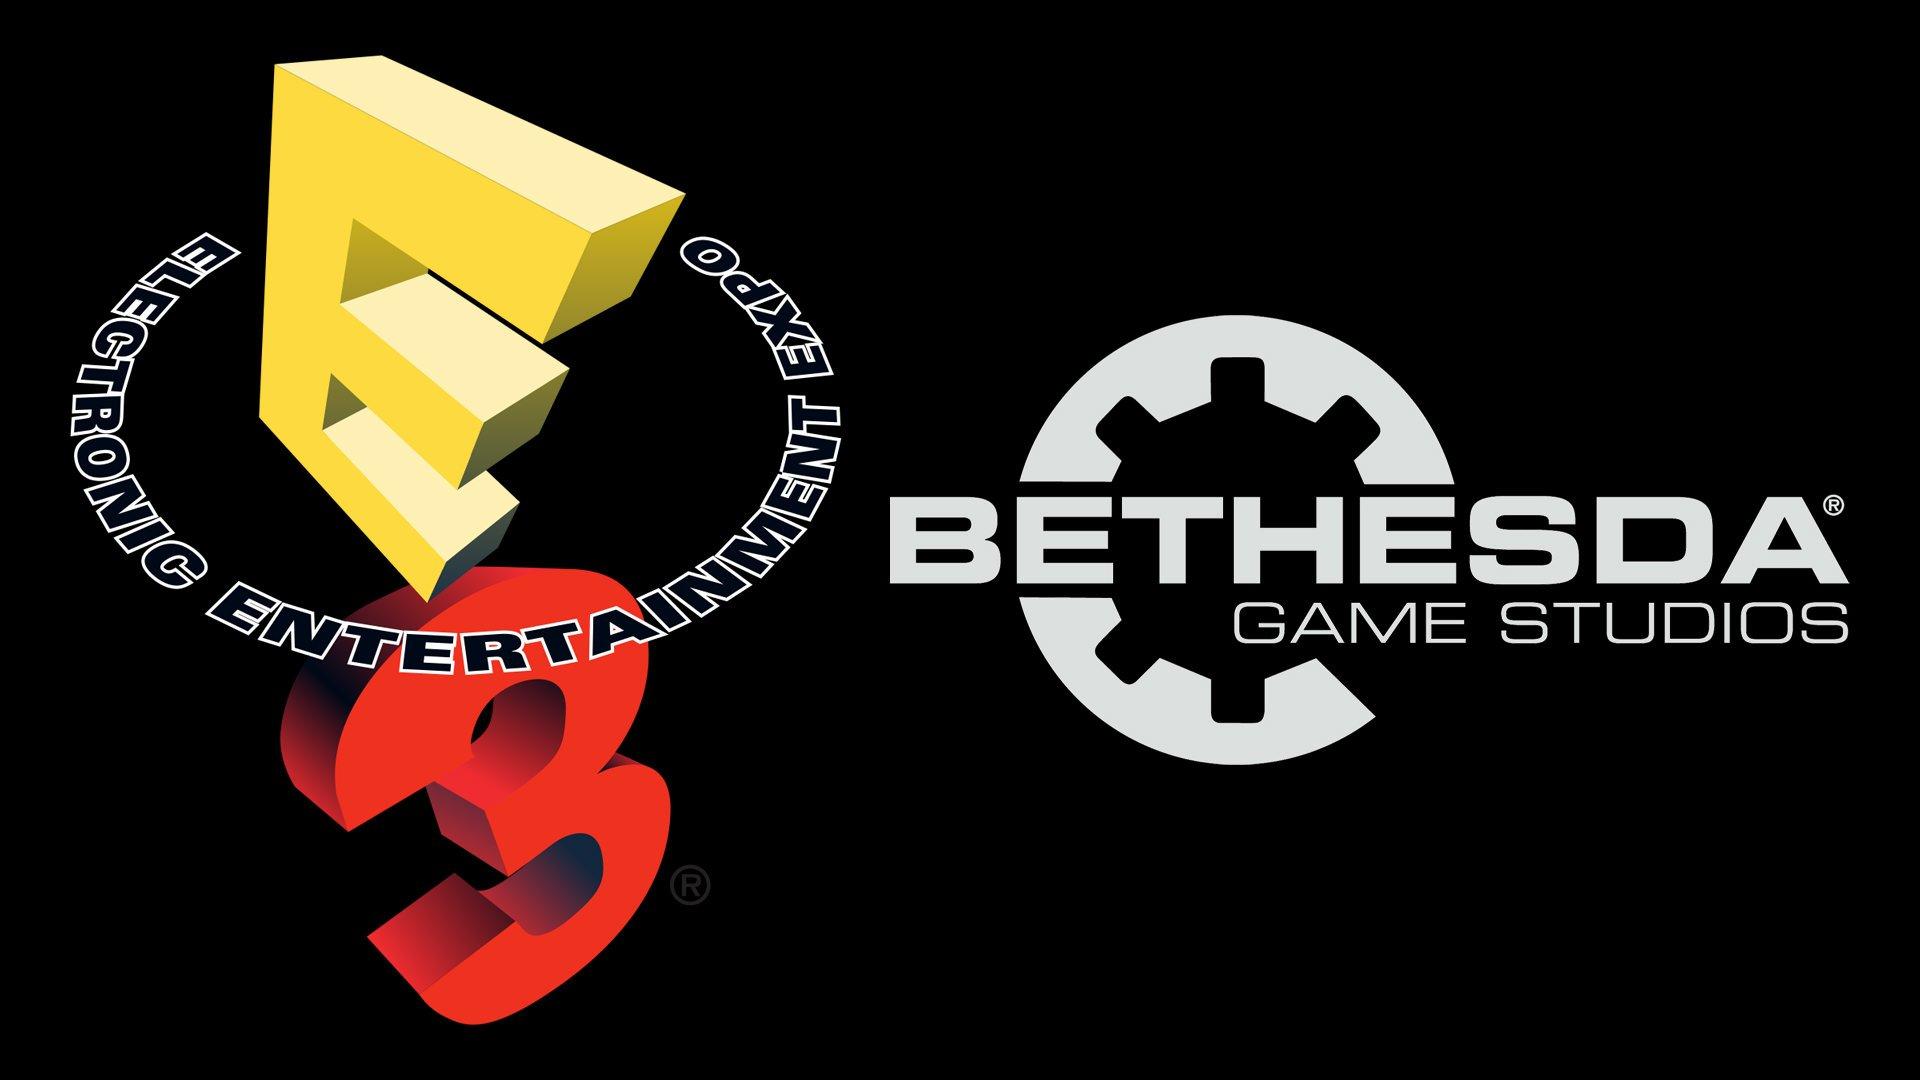 Bethesda is Heading to E3 Official Showcase Date Announced